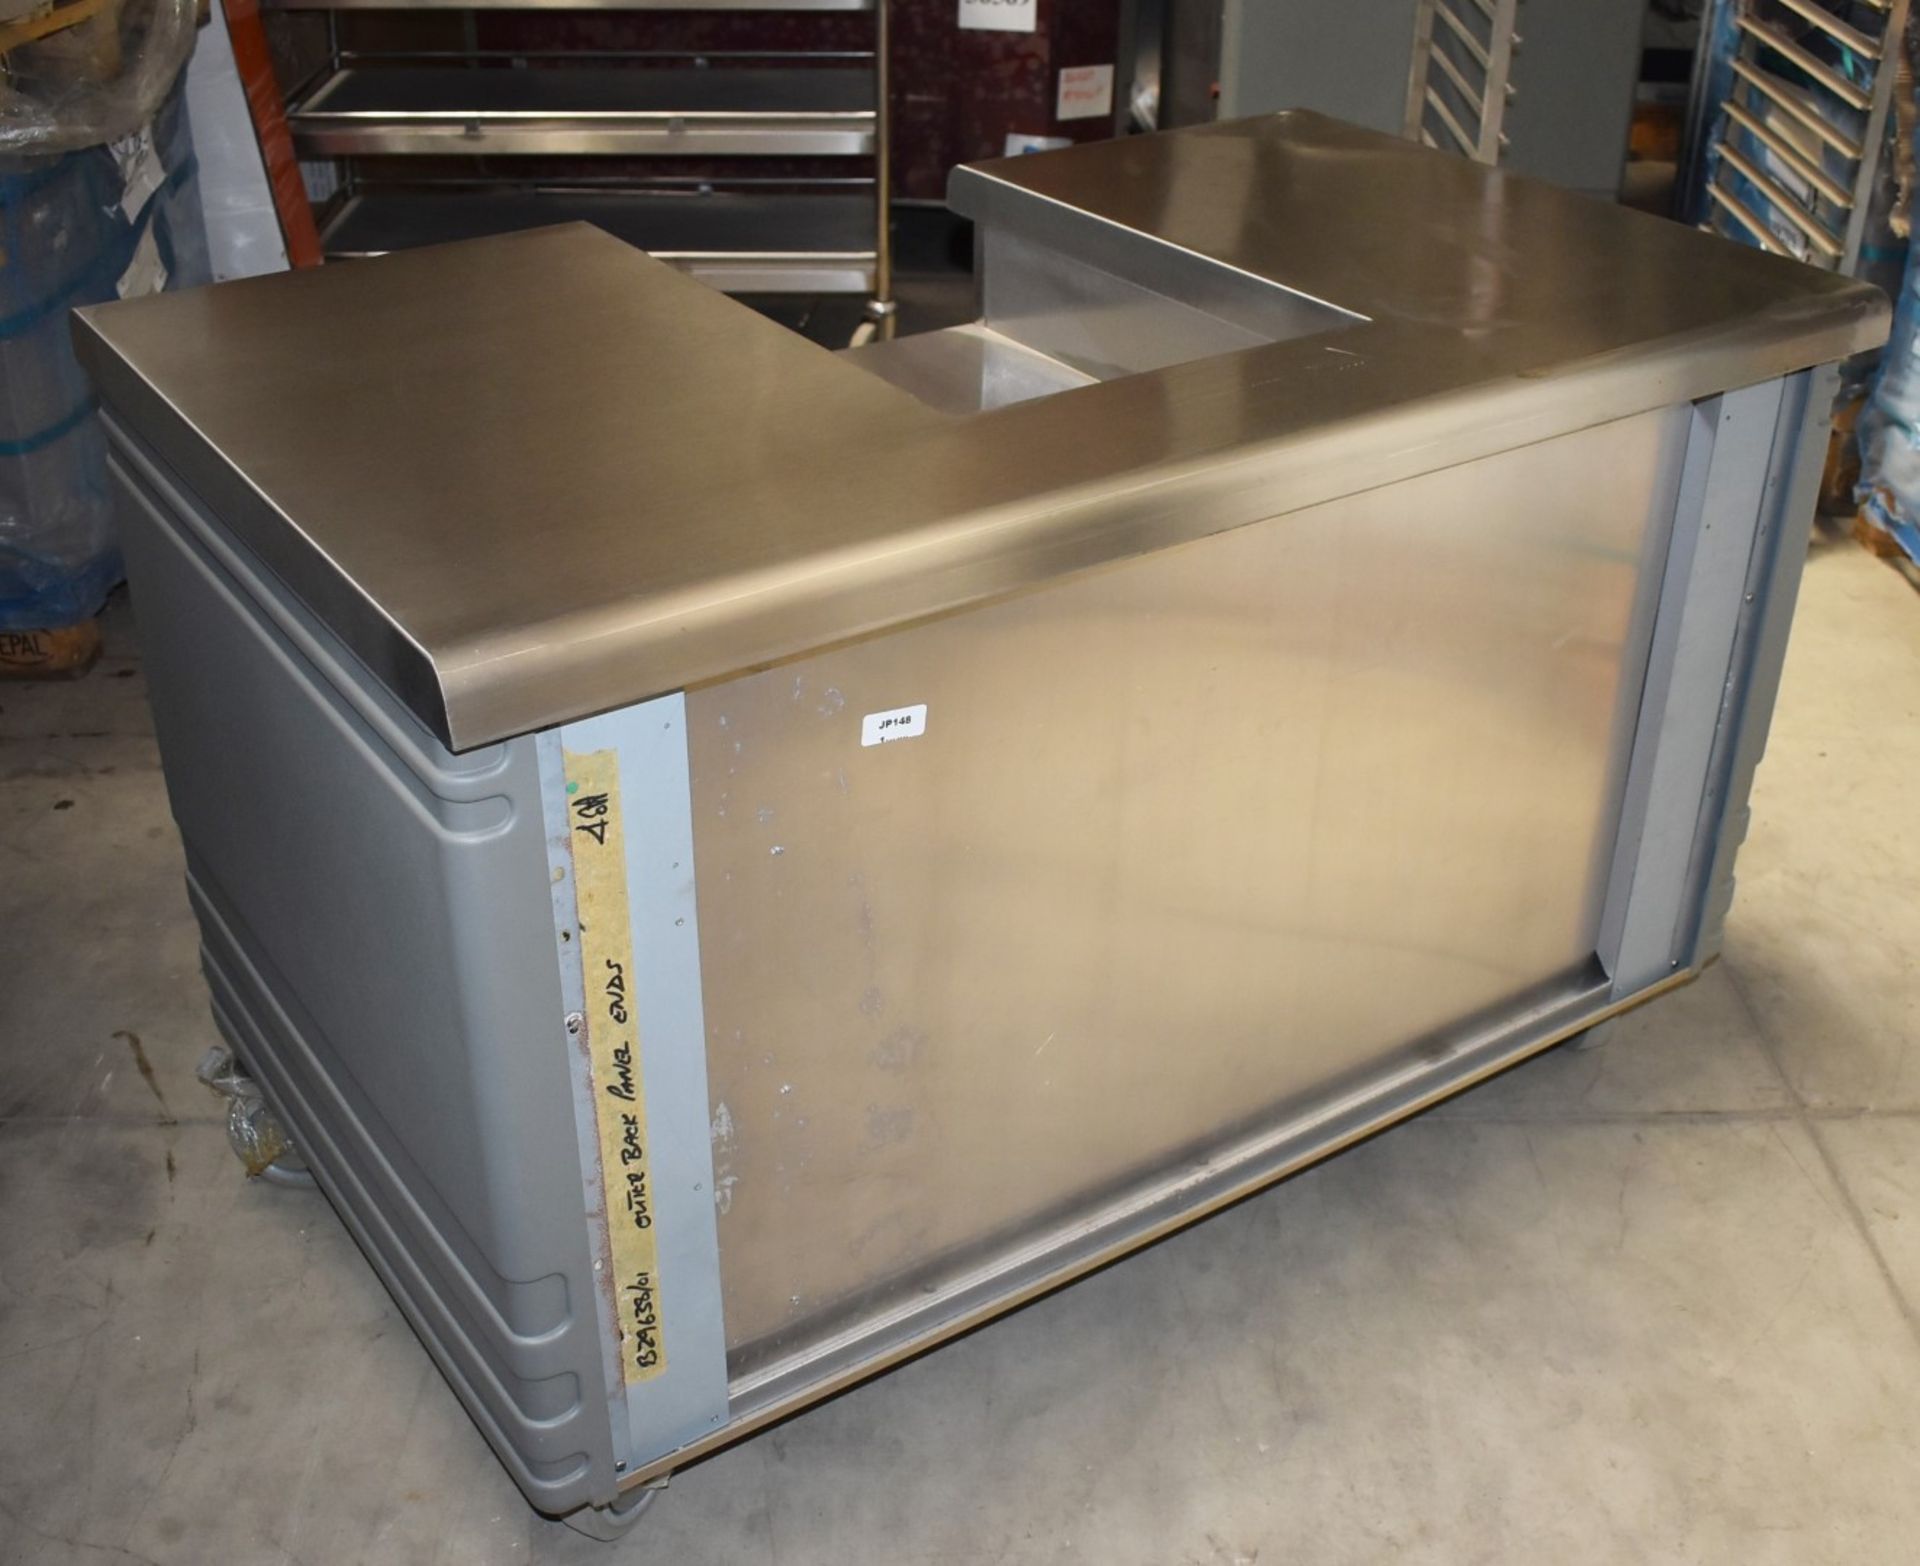 1 x Grundy Commercial Mobile Servery Unit With Stainless Steel Top Featuring Insert For Appliance or - Image 4 of 12